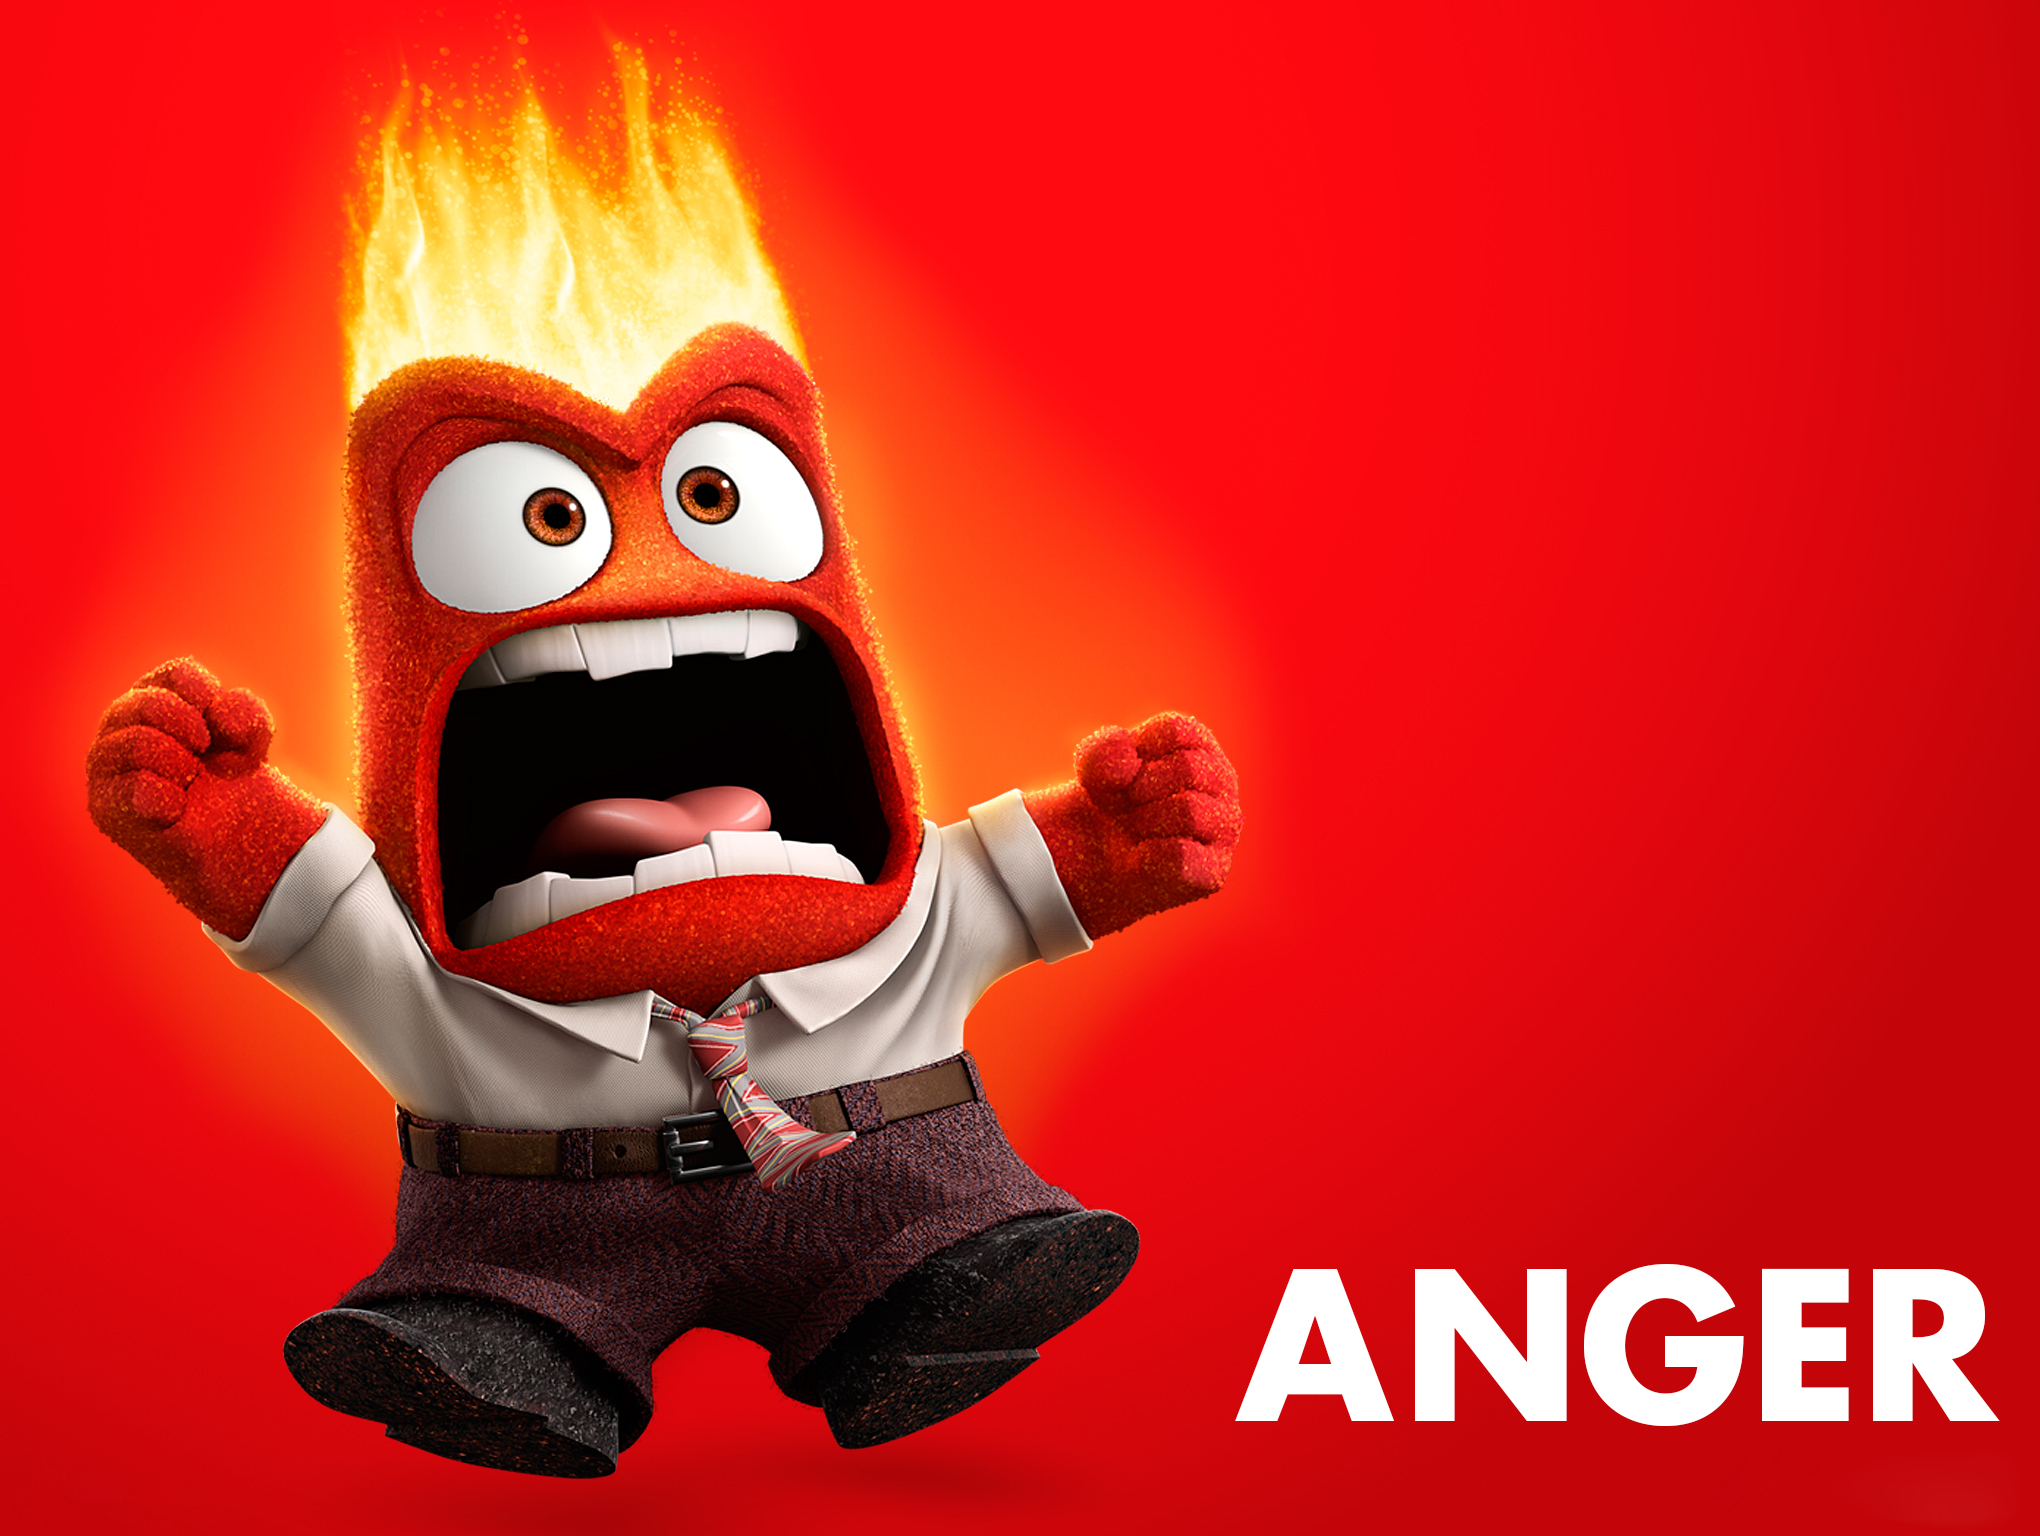 Anger (Inside Out) HD Wallpapers and Backgrounds. 